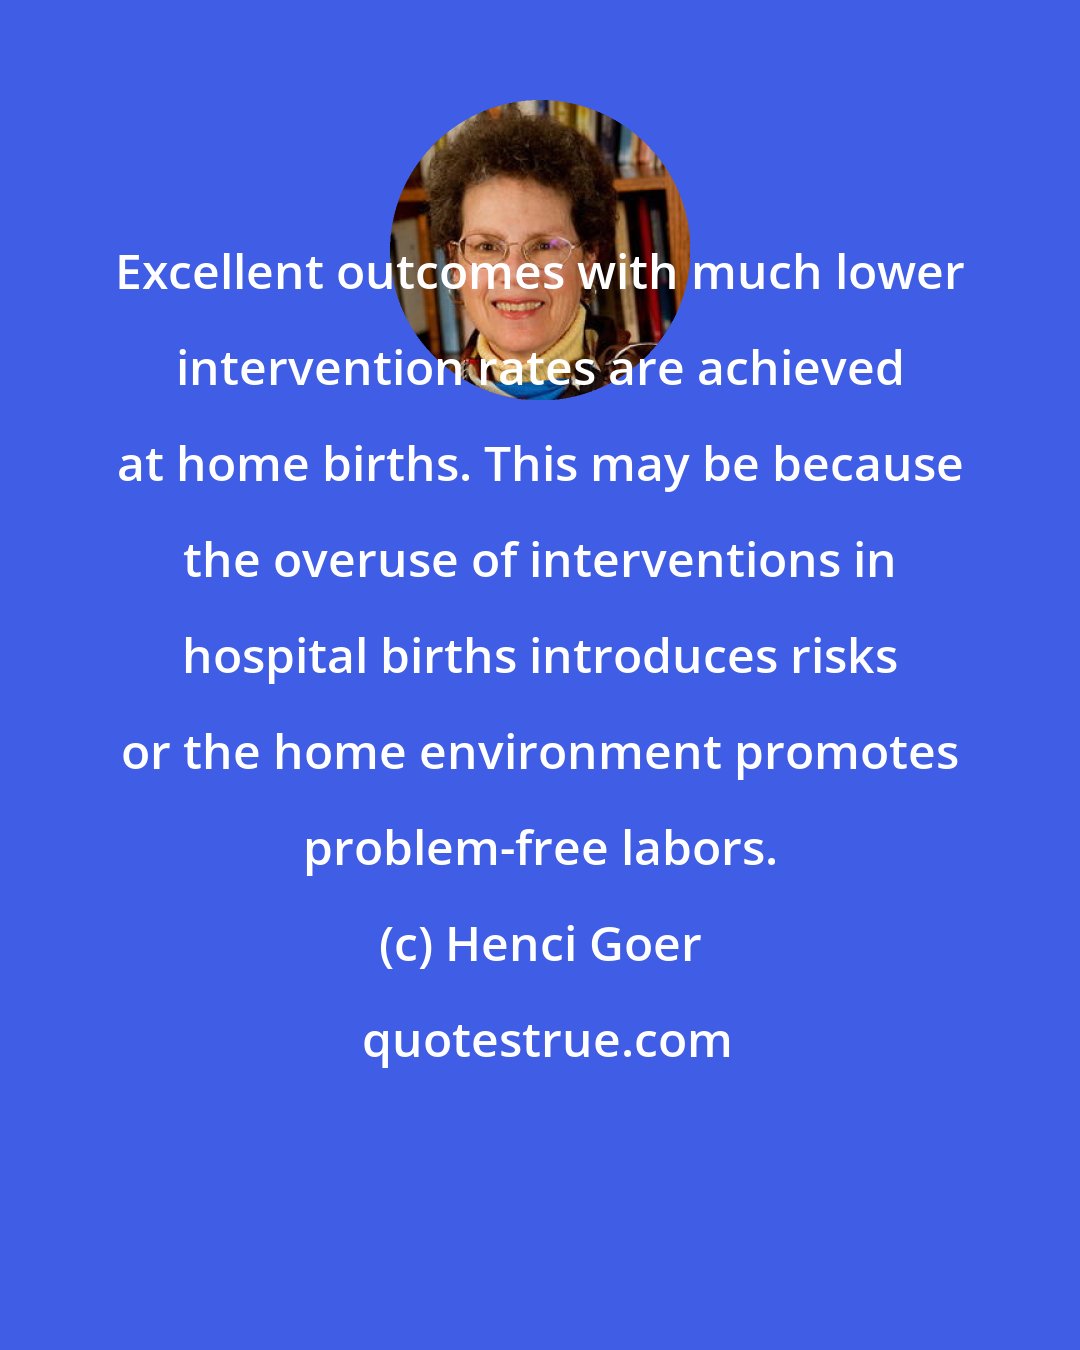 Henci Goer: Excellent outcomes with much lower intervention rates are achieved at home births. This may be because the overuse of interventions in hospital births introduces risks or the home environment promotes problem-free labors.